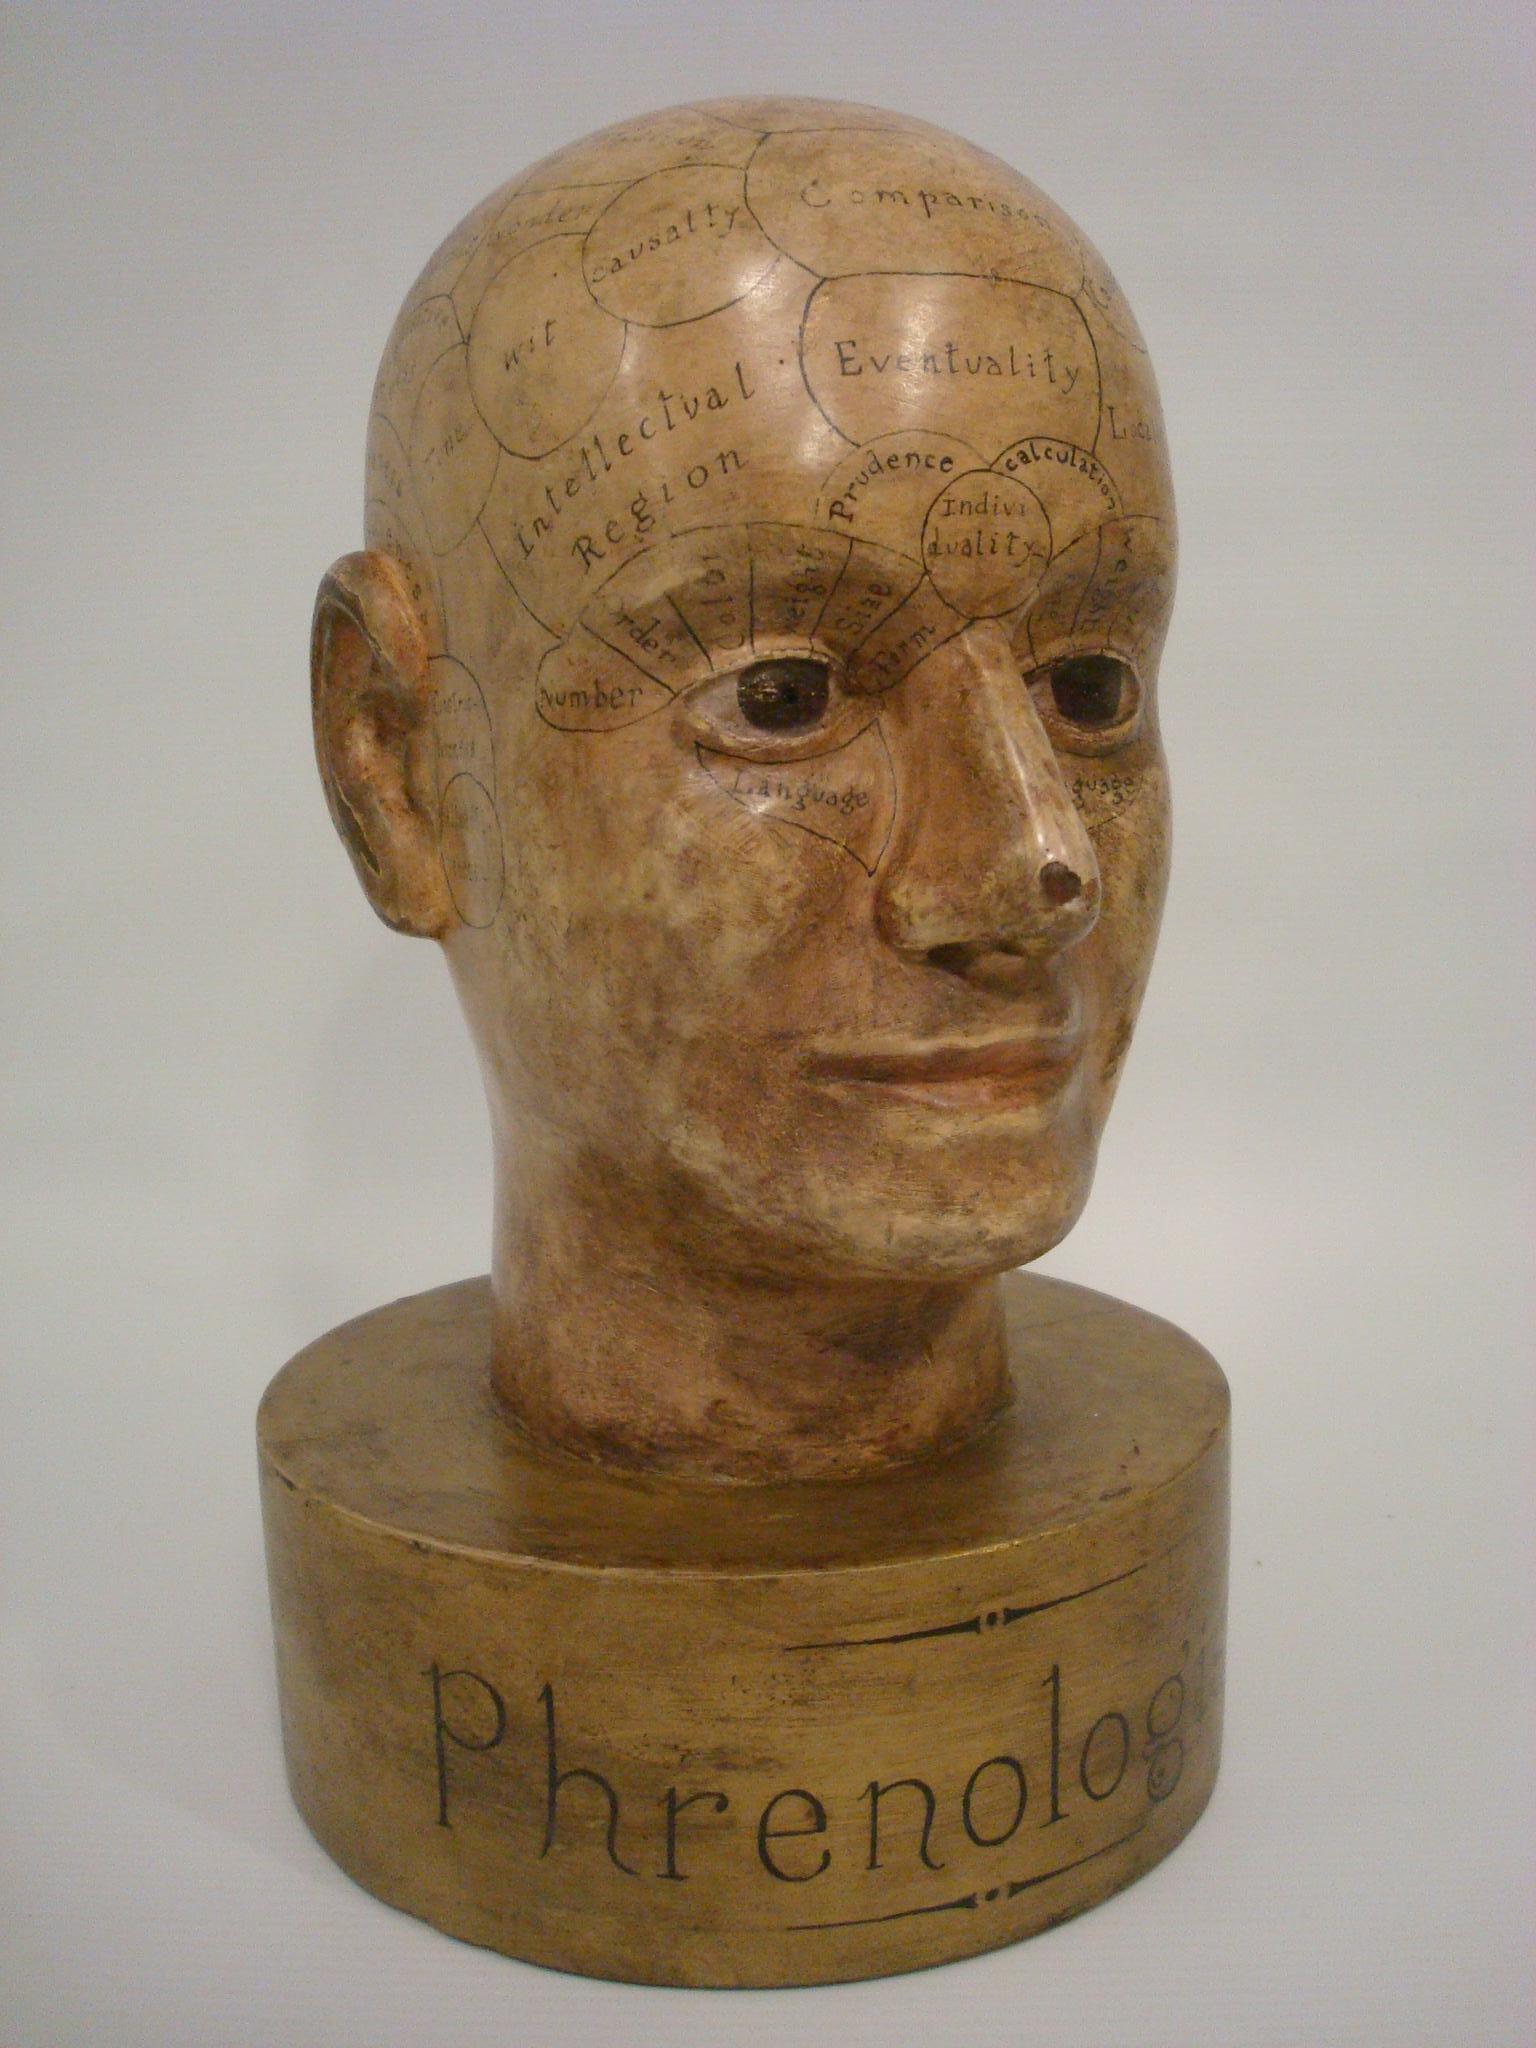 Carved and painted wooden phrenology head Store display advertising model. Phrenology bust by unknown wood carver, circa 1870. Perfect to decorate a Doctor´s office or someone that works in medicine.
Phrenology was a science of character